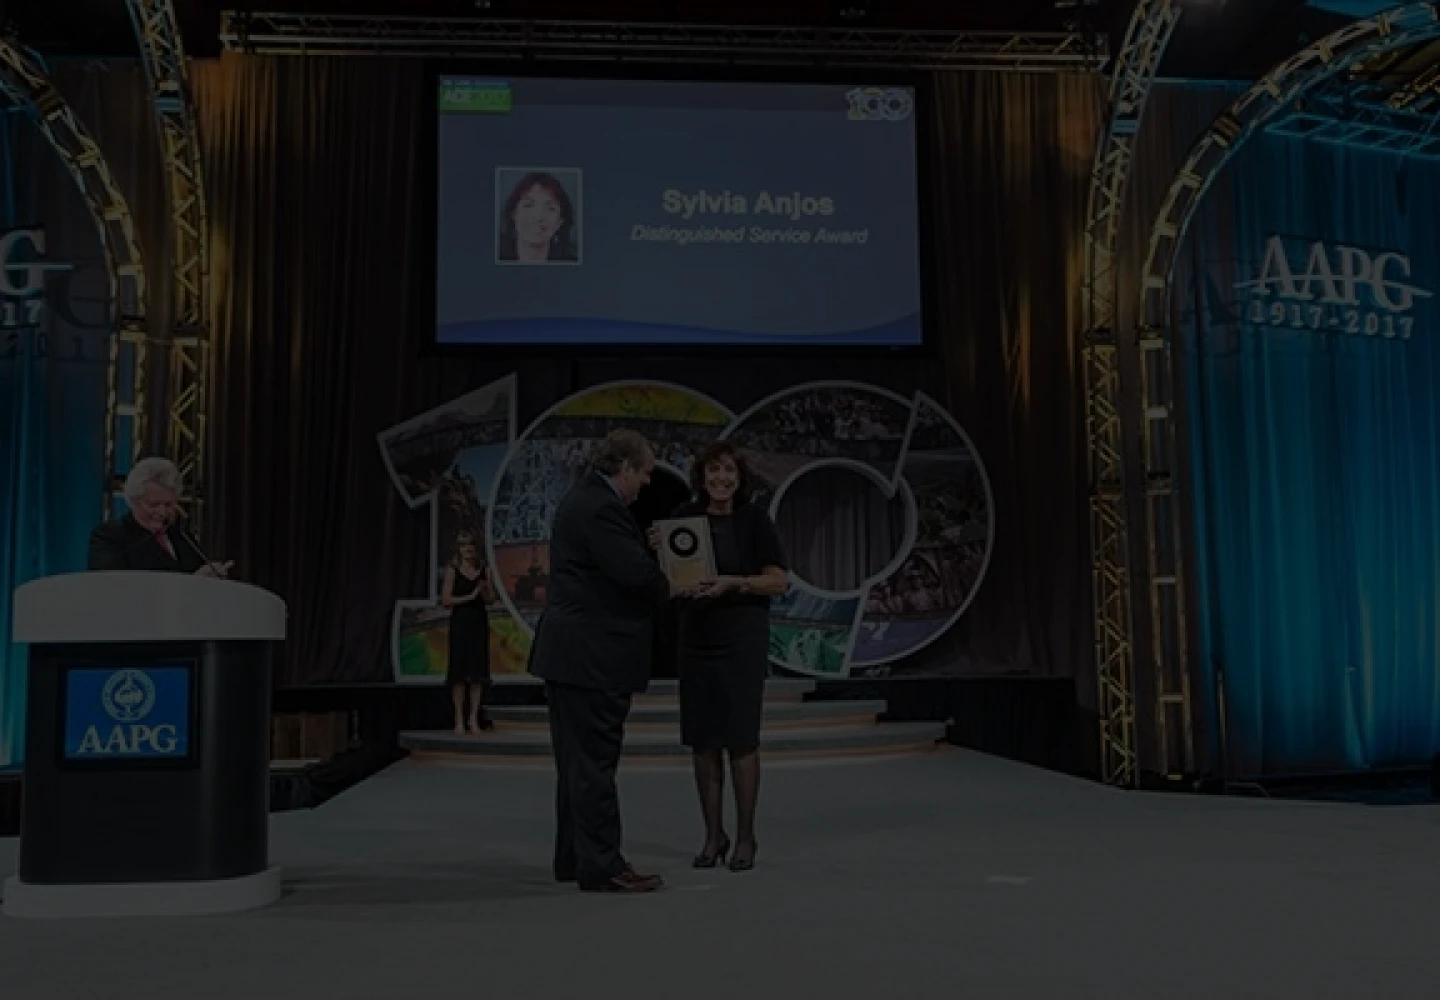 Photo of Sylvia Anjos, Petrobras geologist, receiving the AAPG Distinguished Service Award.